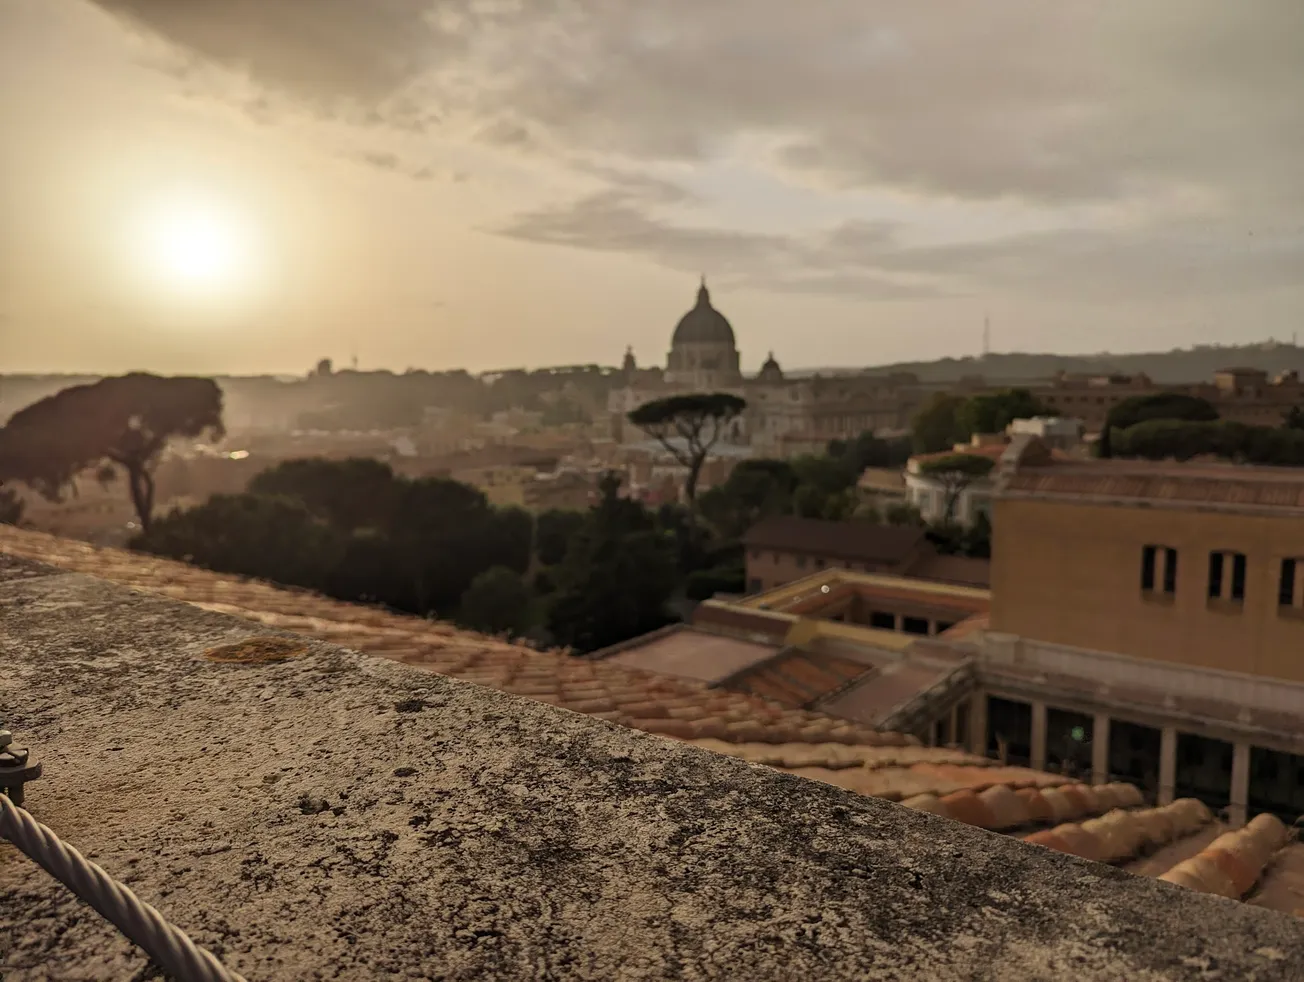 Can Africa be found on a Catholic pilgrimage to Rome?